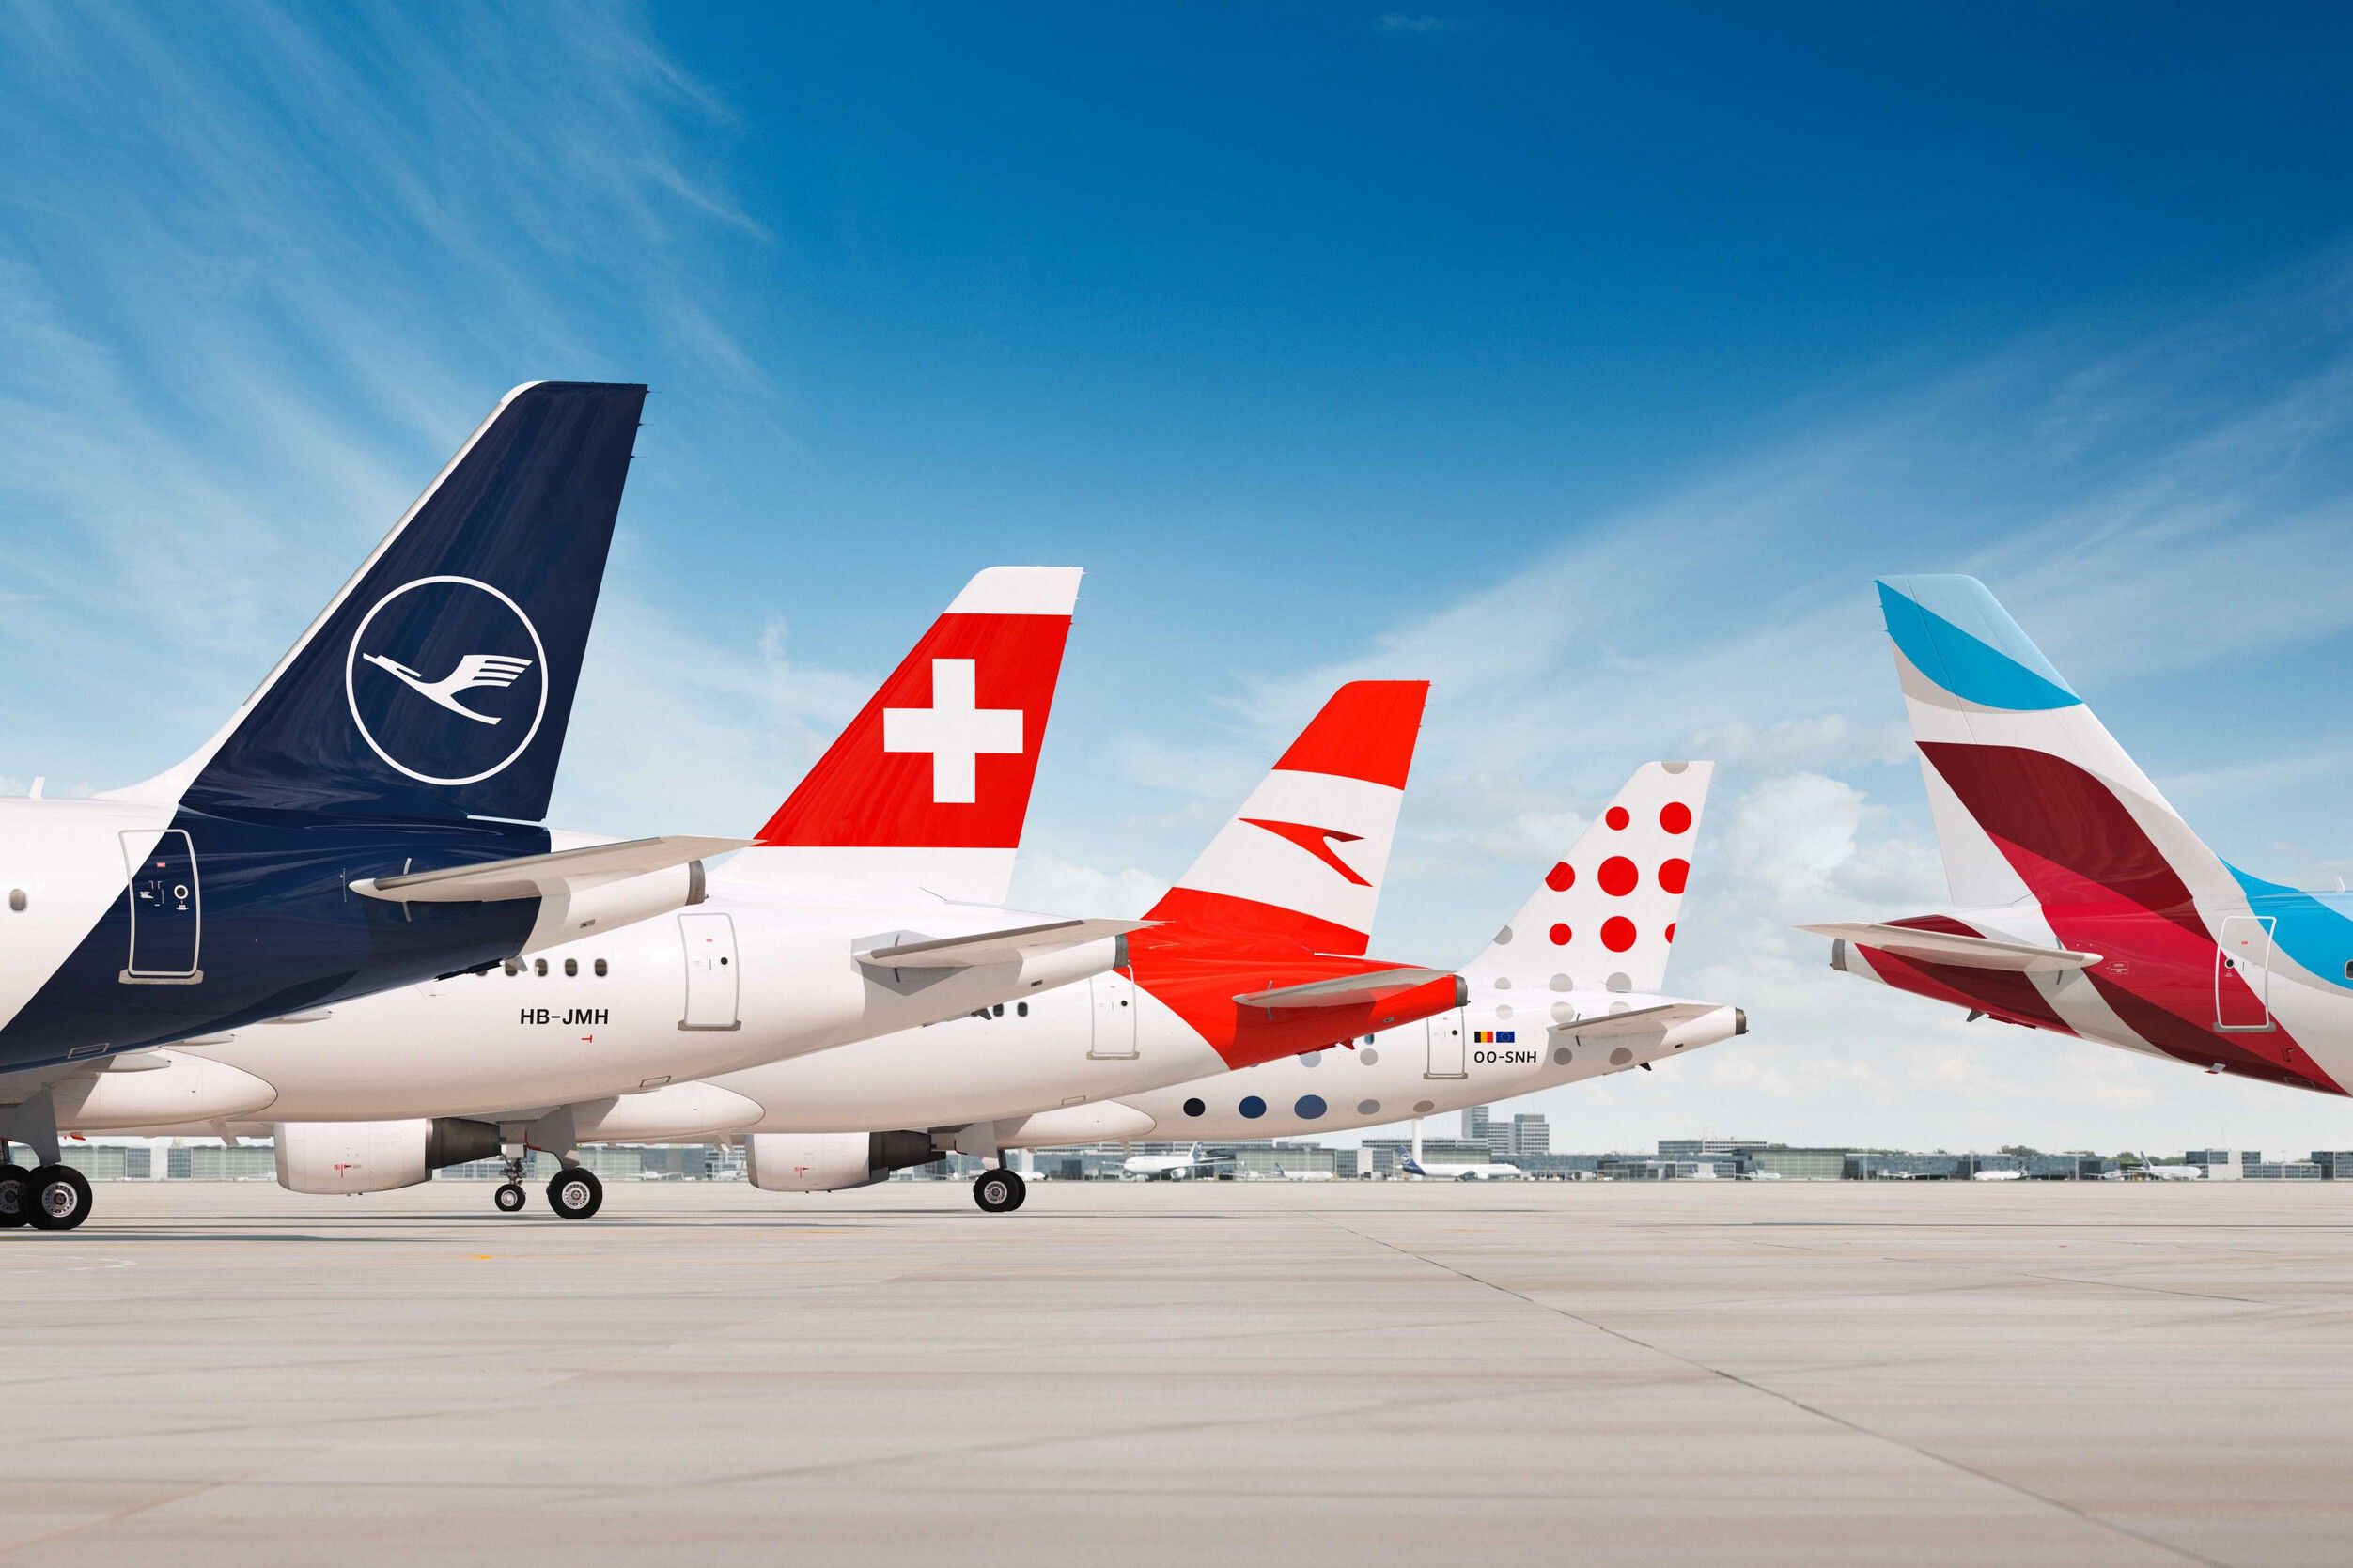 Tails of Lufthansa Group airlines, including Lufthansa, SWISS, Austrian, Brussels, and Eurowings.